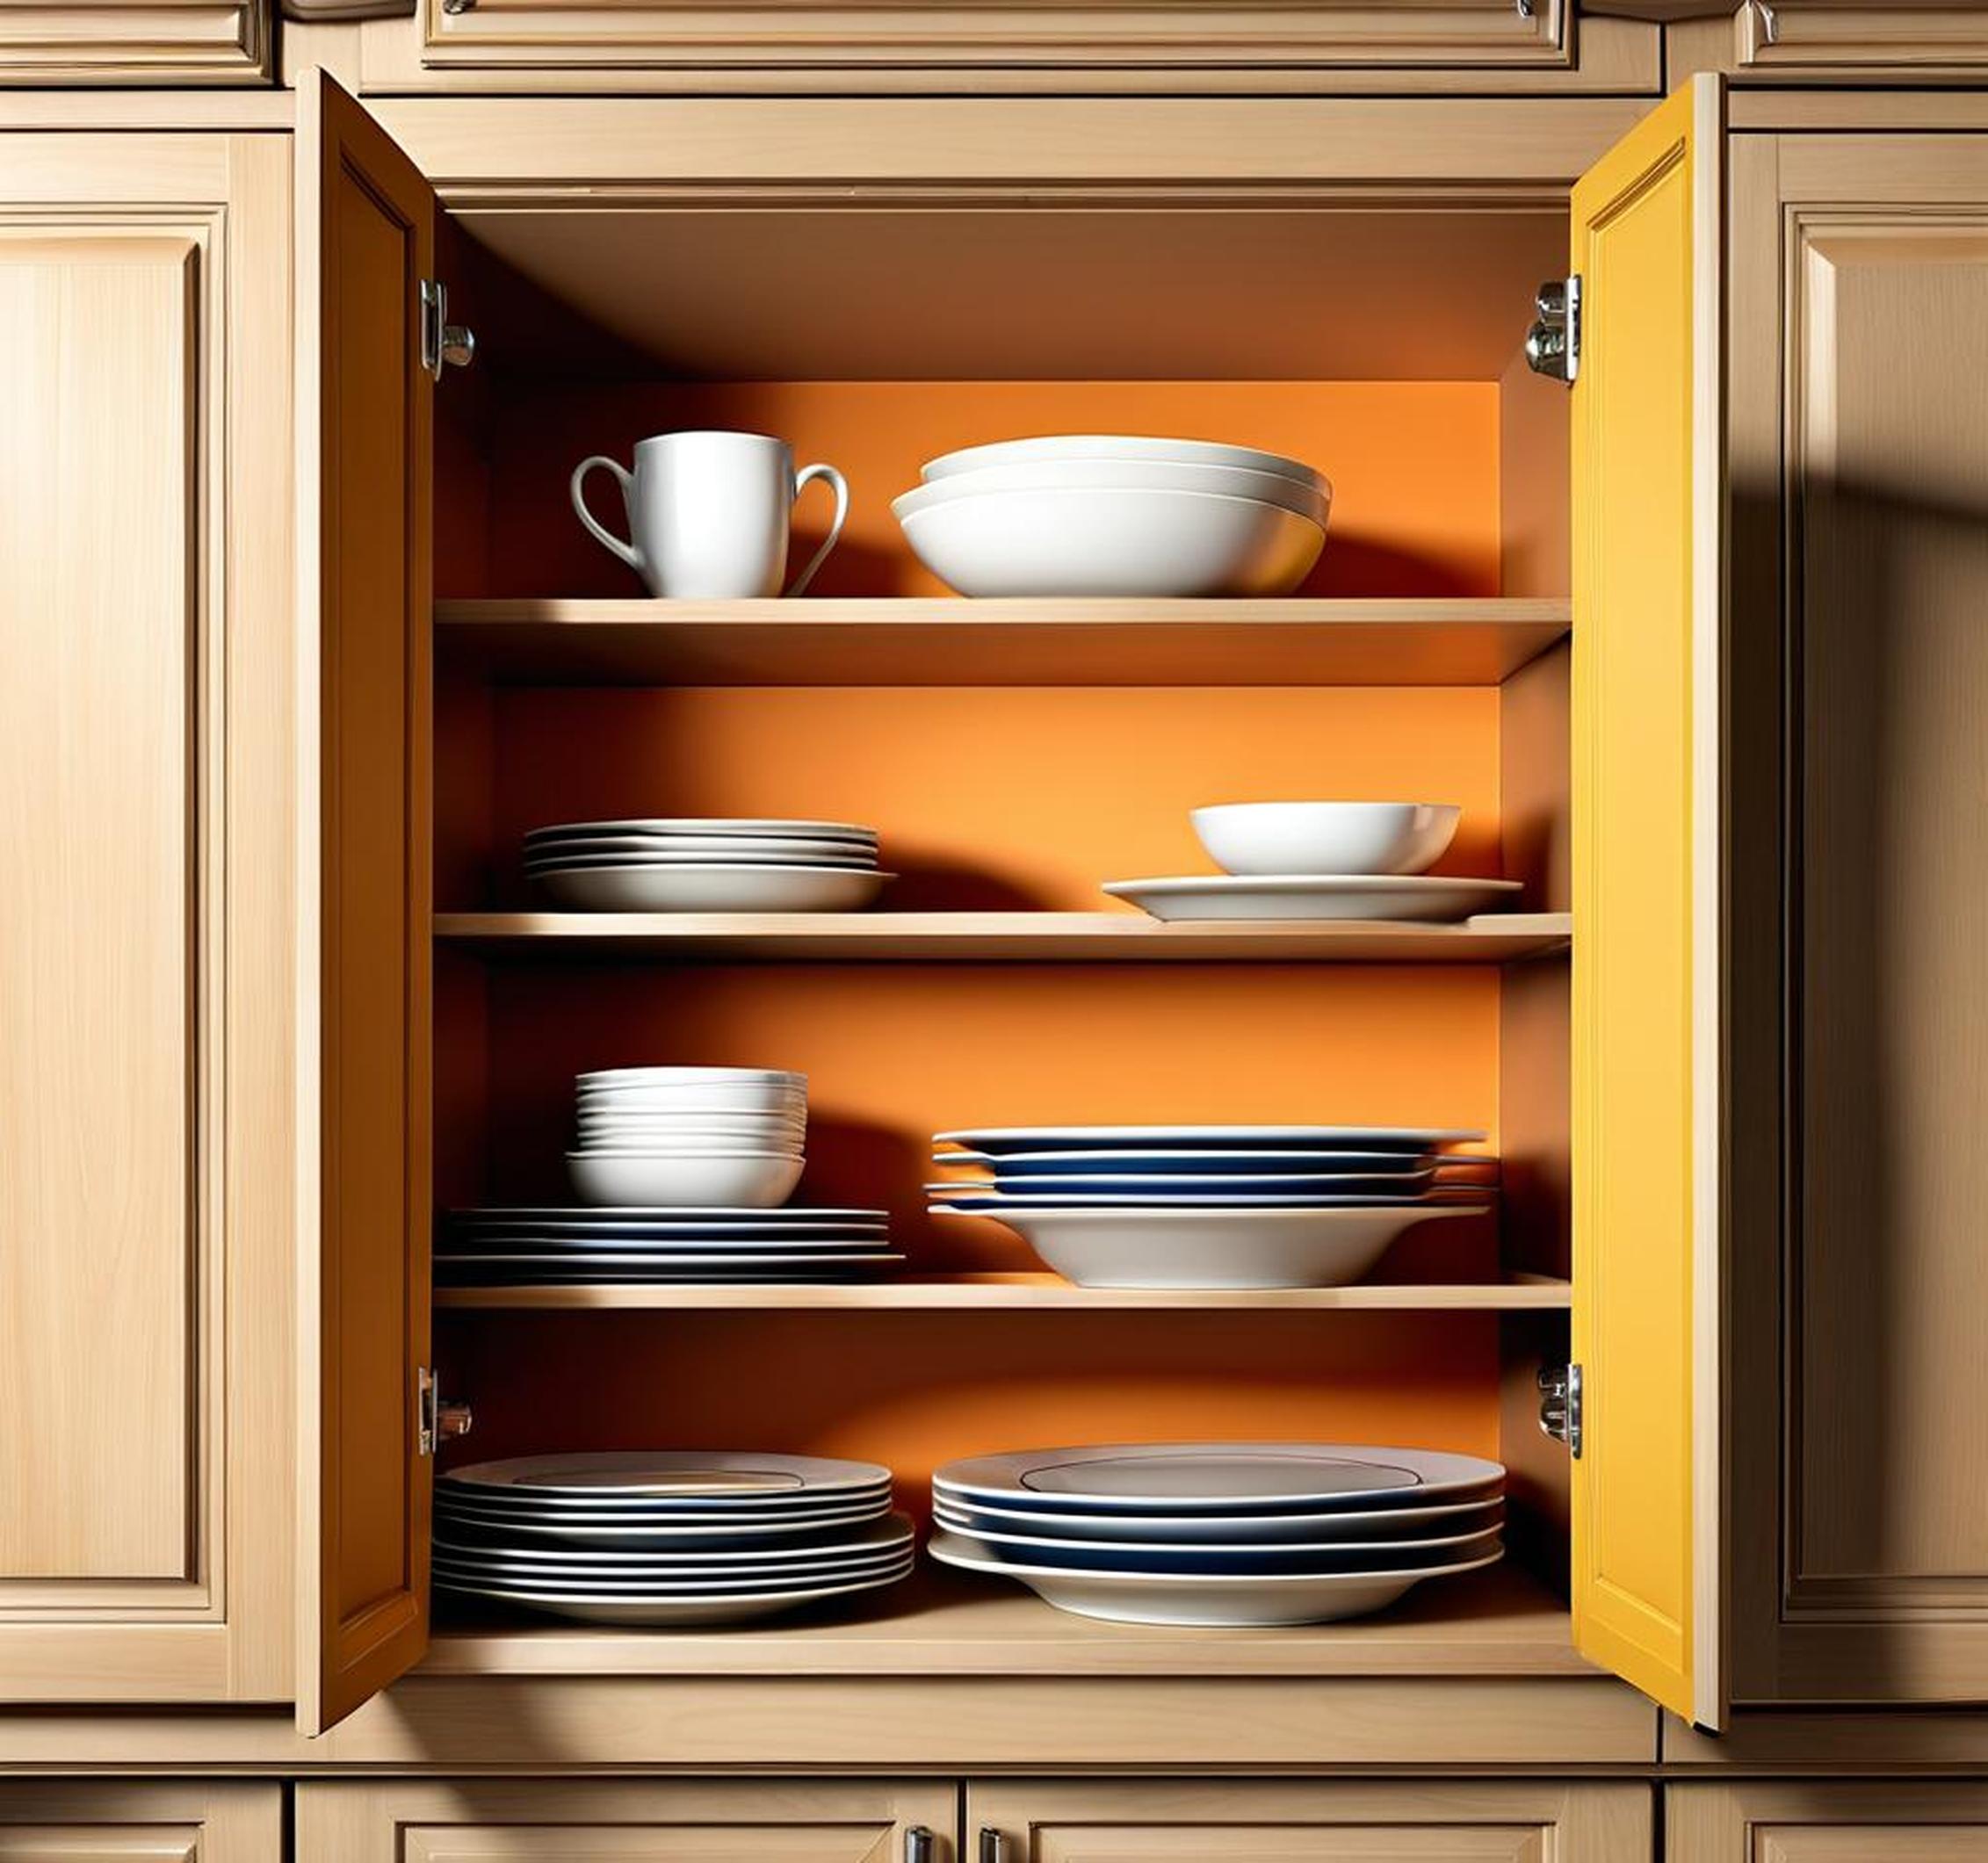 there are 15 plates in a kitchen cabinet